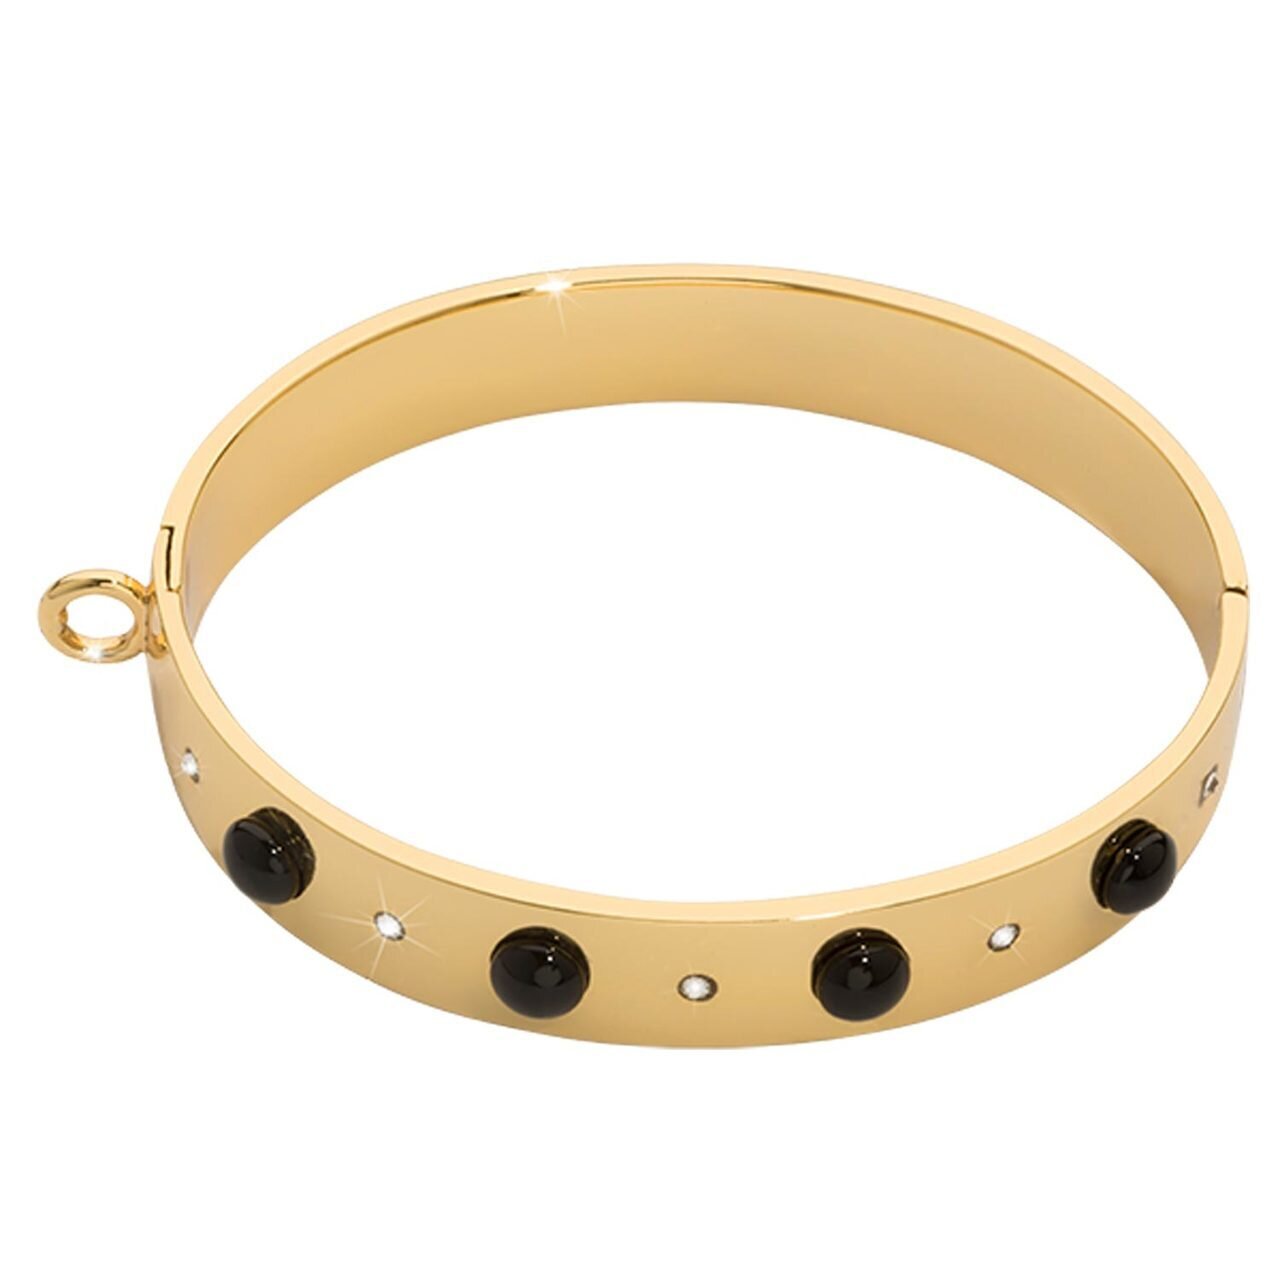 Nikki Lissoni Bangle of 1cm with Black Pearls Swarovski Crystals One Loop To Attach A Charm Gold-plated 19cm B1144G19